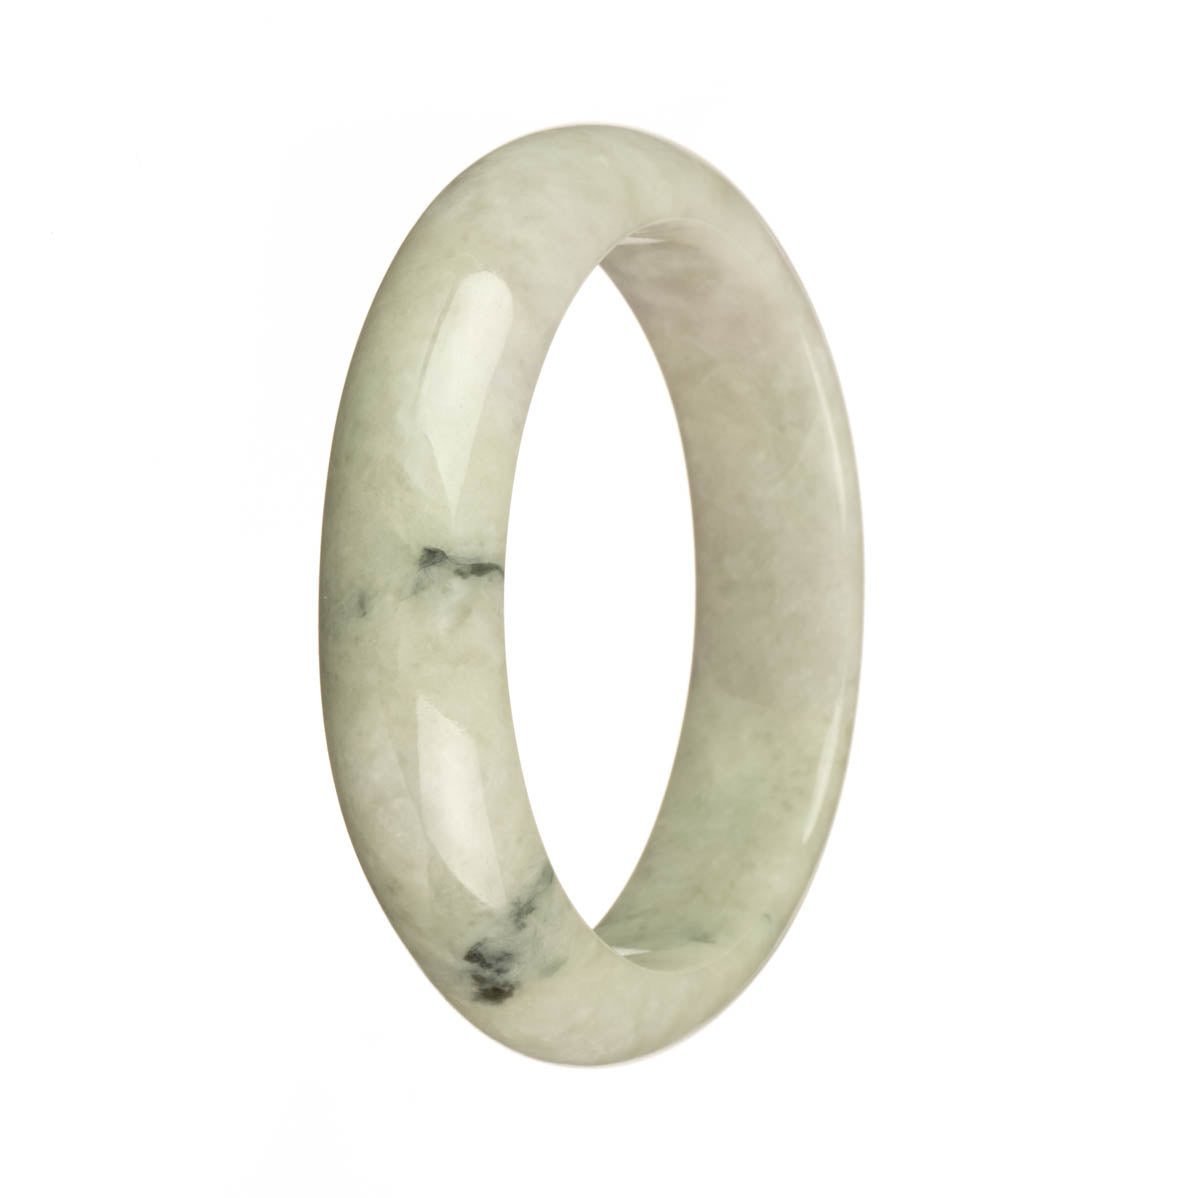 Real Grade A White and Pale Green with Dark Green Pattern Jade Bracelet - 58mm Half Moon